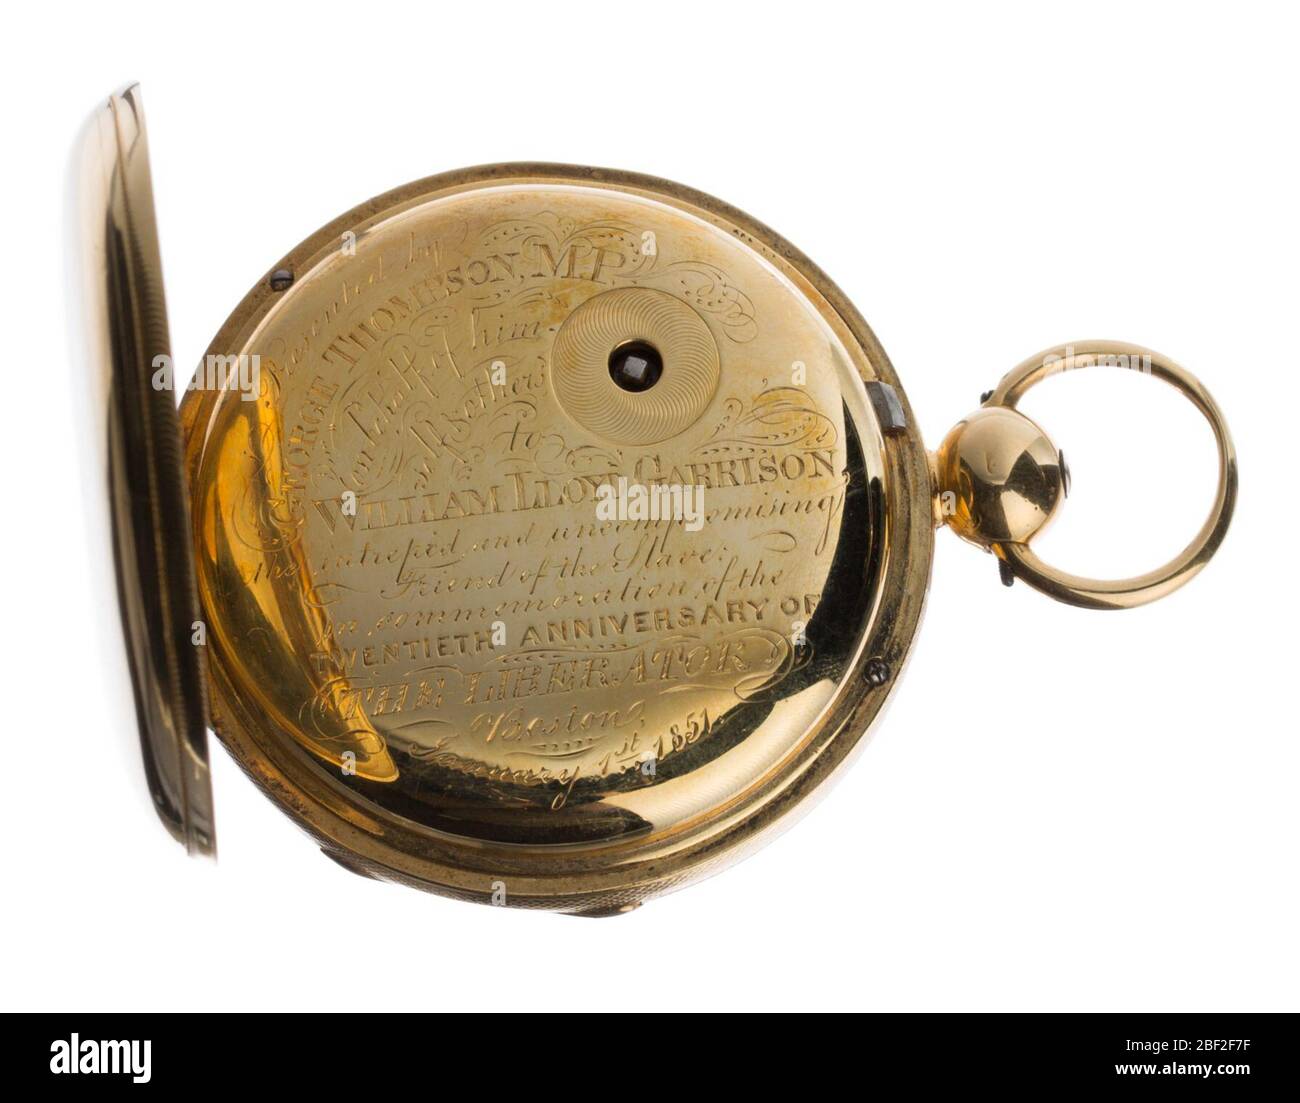 Pocketwatch inscribed to William Lloyd Garrison from George Thompson. An inscribed gold pocket watch presented to William Lloyd Garrison. The watch has a half hunter case, with spring hinged glass cover over the dial and a hinged gold lid over the back, protecting the inscription and winding square. Stock Photo